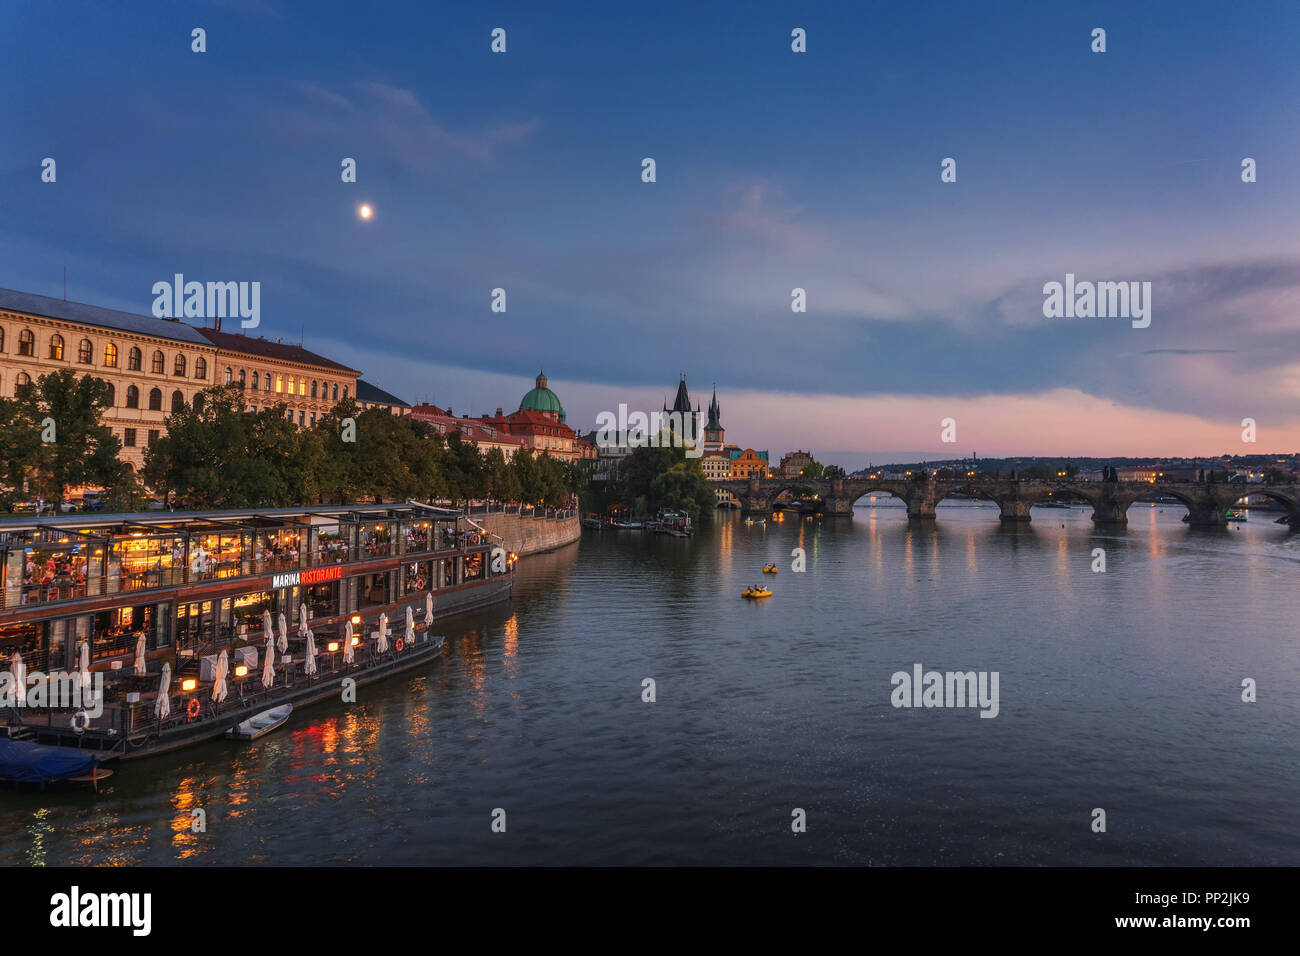 Prague, Czechia - September 19, 2018 : People eat at the famous Marina restaurant along the Vltava river with Charles bridge in the background at suns Stock Photo